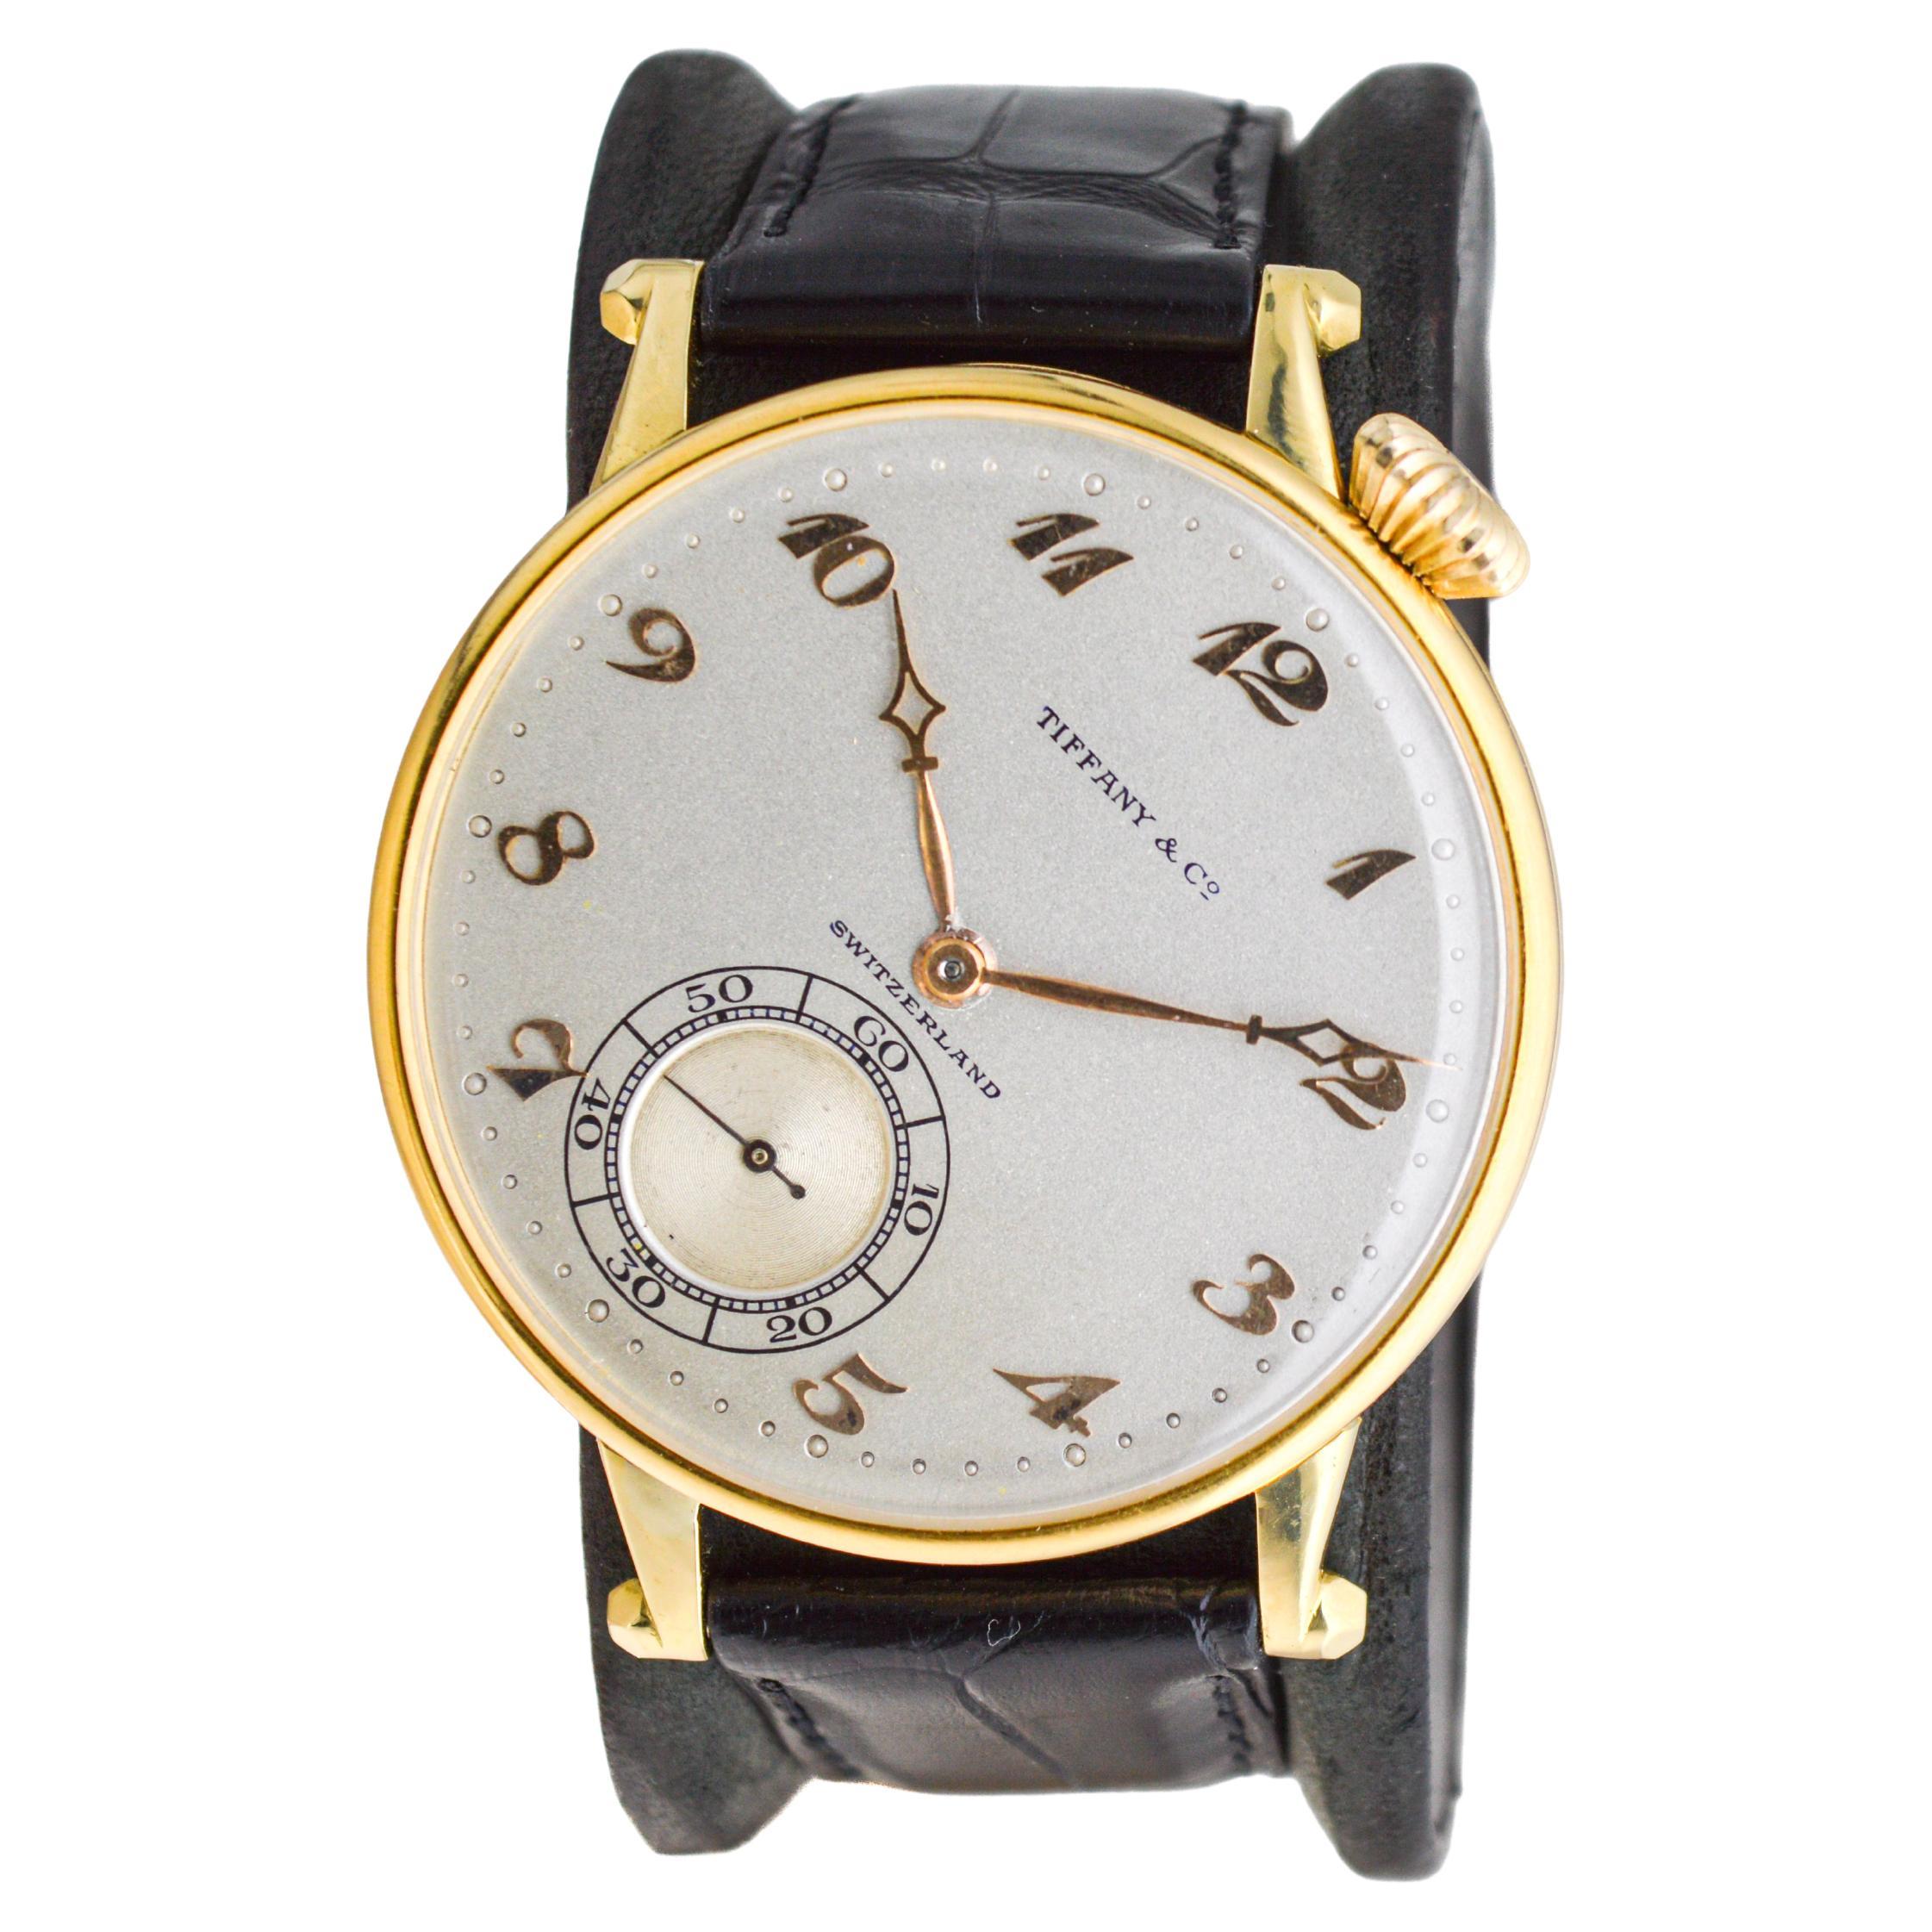 Agassiz 18Kt. Gold Oversized Watch for Tiffany & Co. Stern Freres Dial 1920's